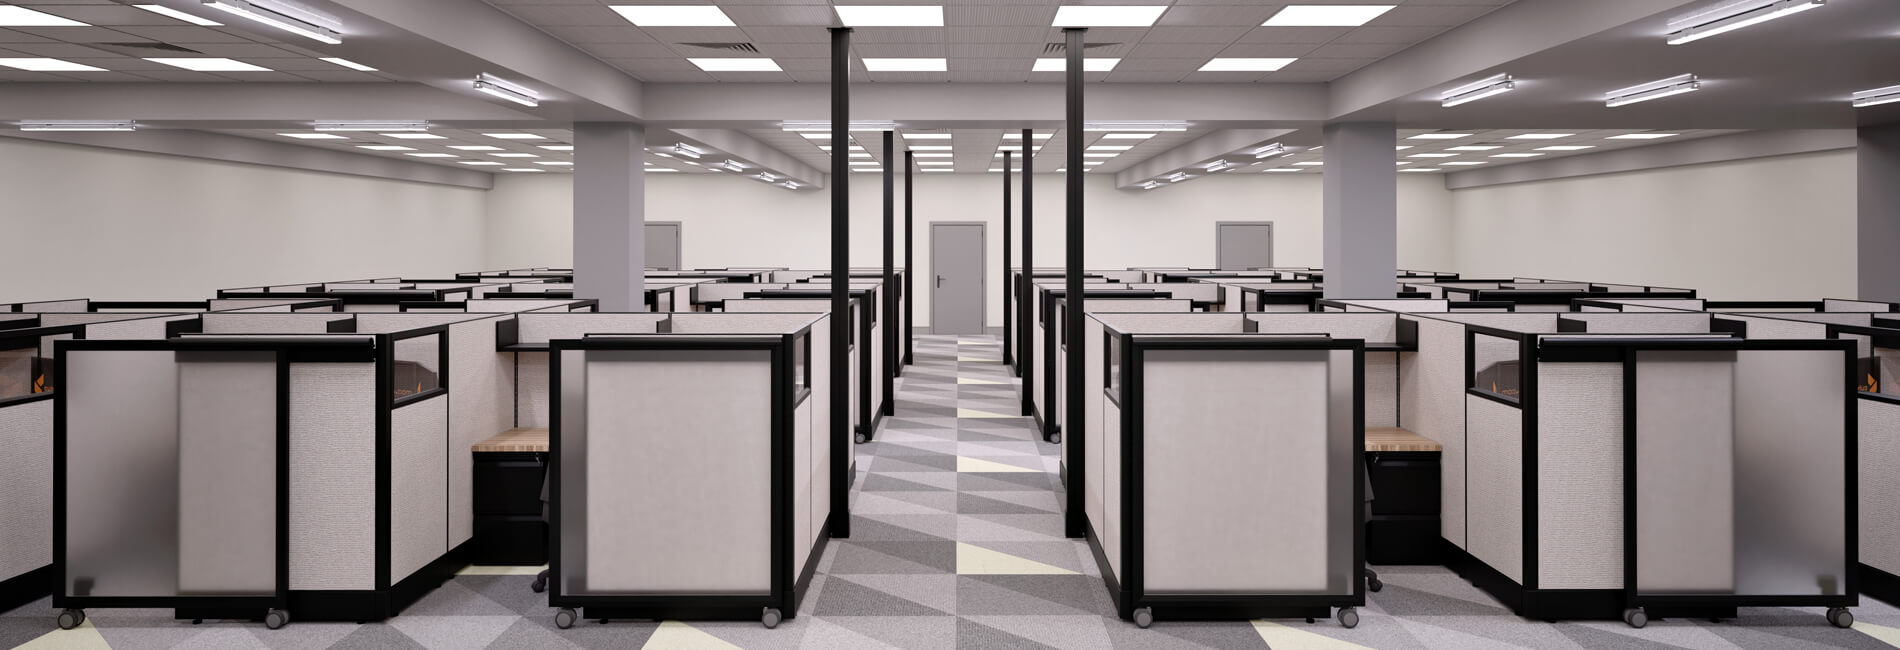 Cubicle Door - Office Cubicles with Doors 67H | Office Cubicle with Door 53H